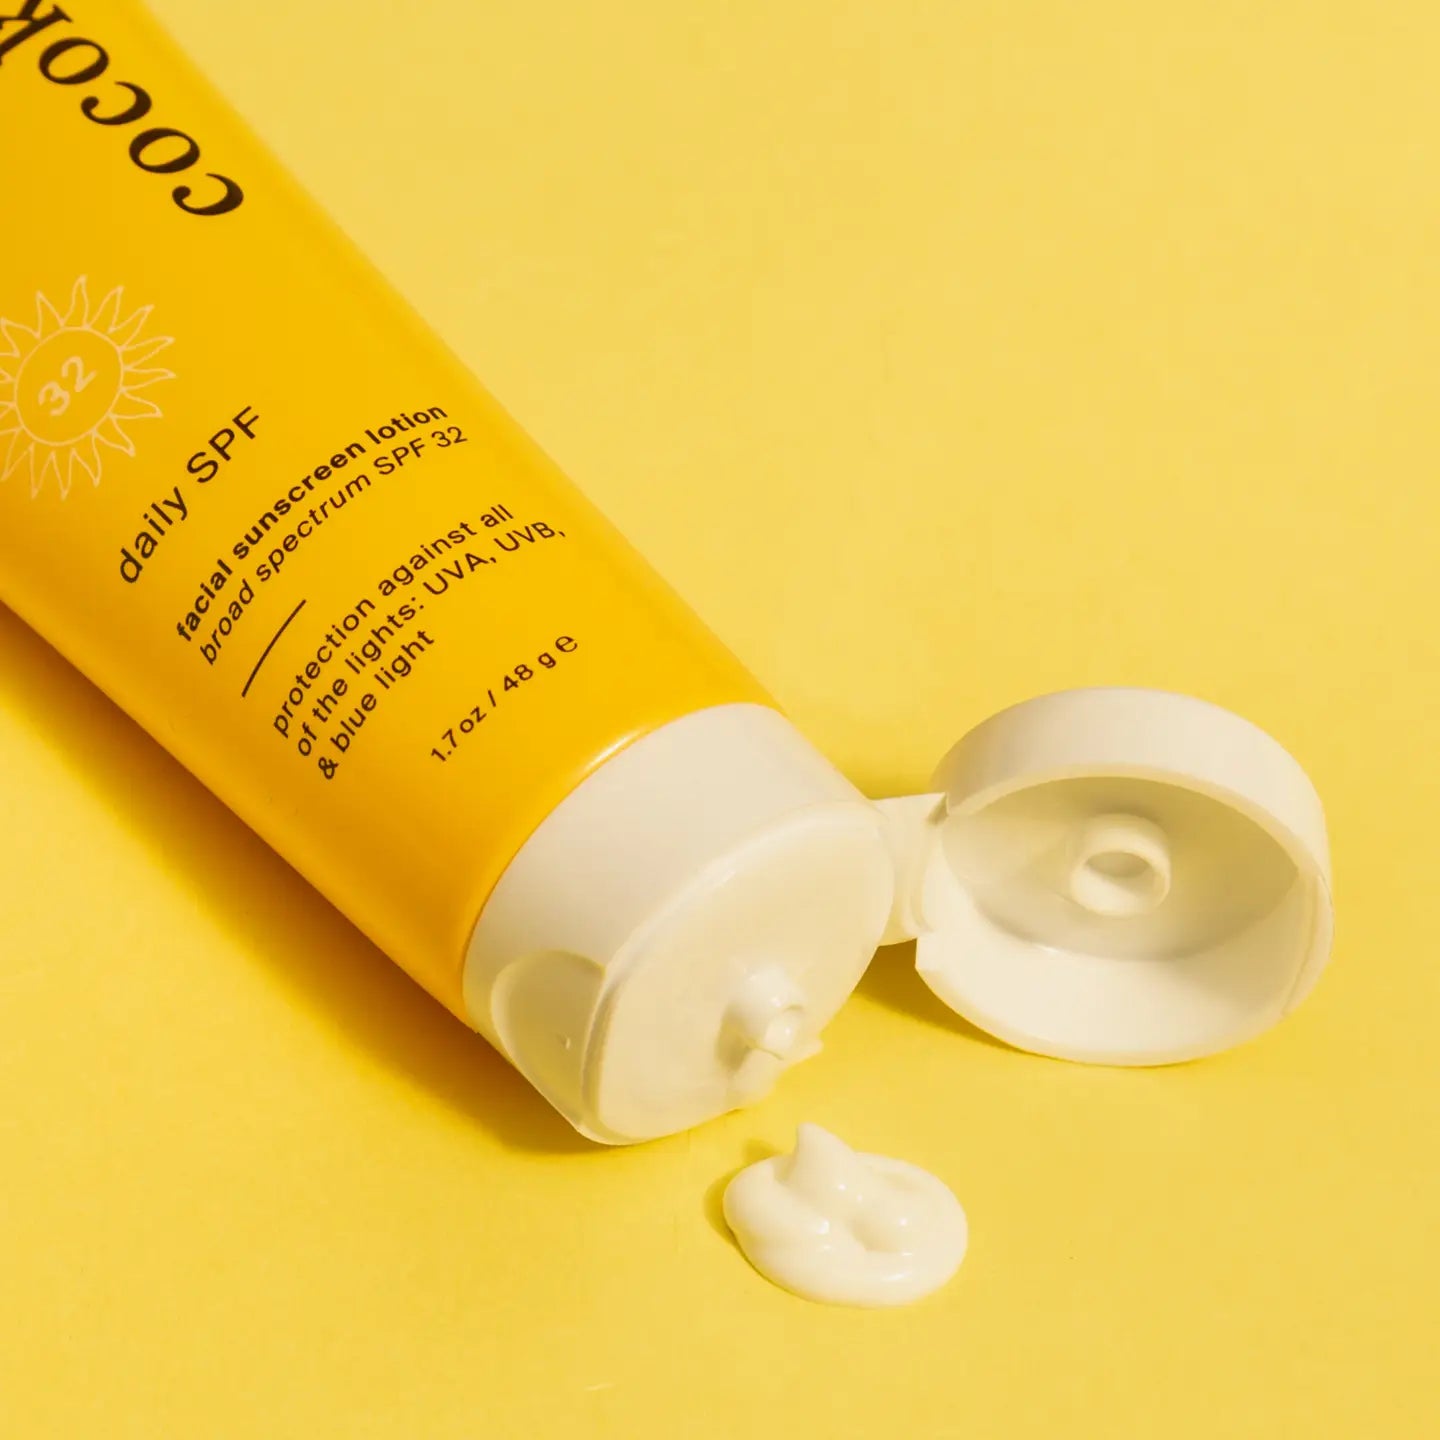 Daily Mineral-Based Spf 32 Sunscreen with Zinc Oxide